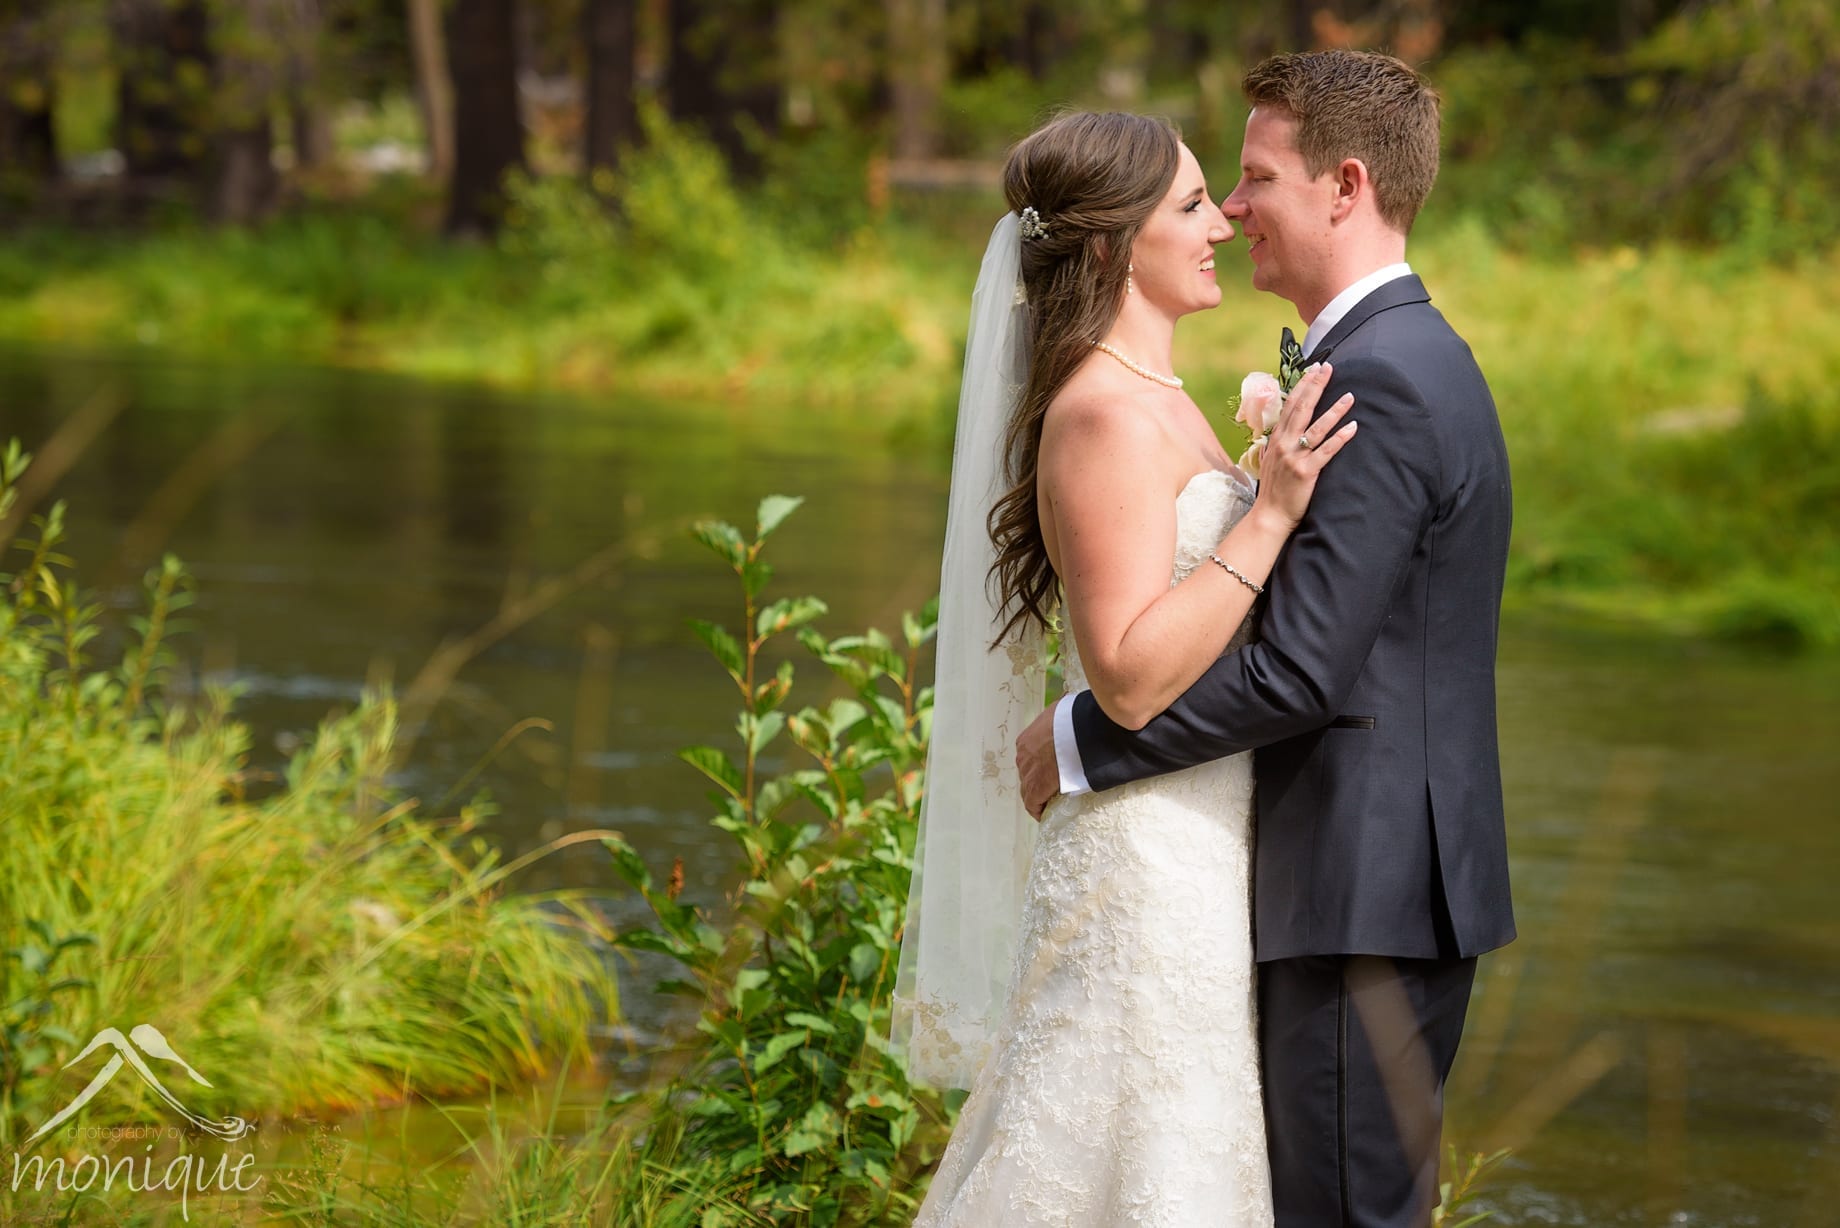 The Lodge at Tahoe Donner wedding photography with a bride and groom next to a small creek during their first look portrait session by Photography by Monique specializing in documentary style wedding photojournalism